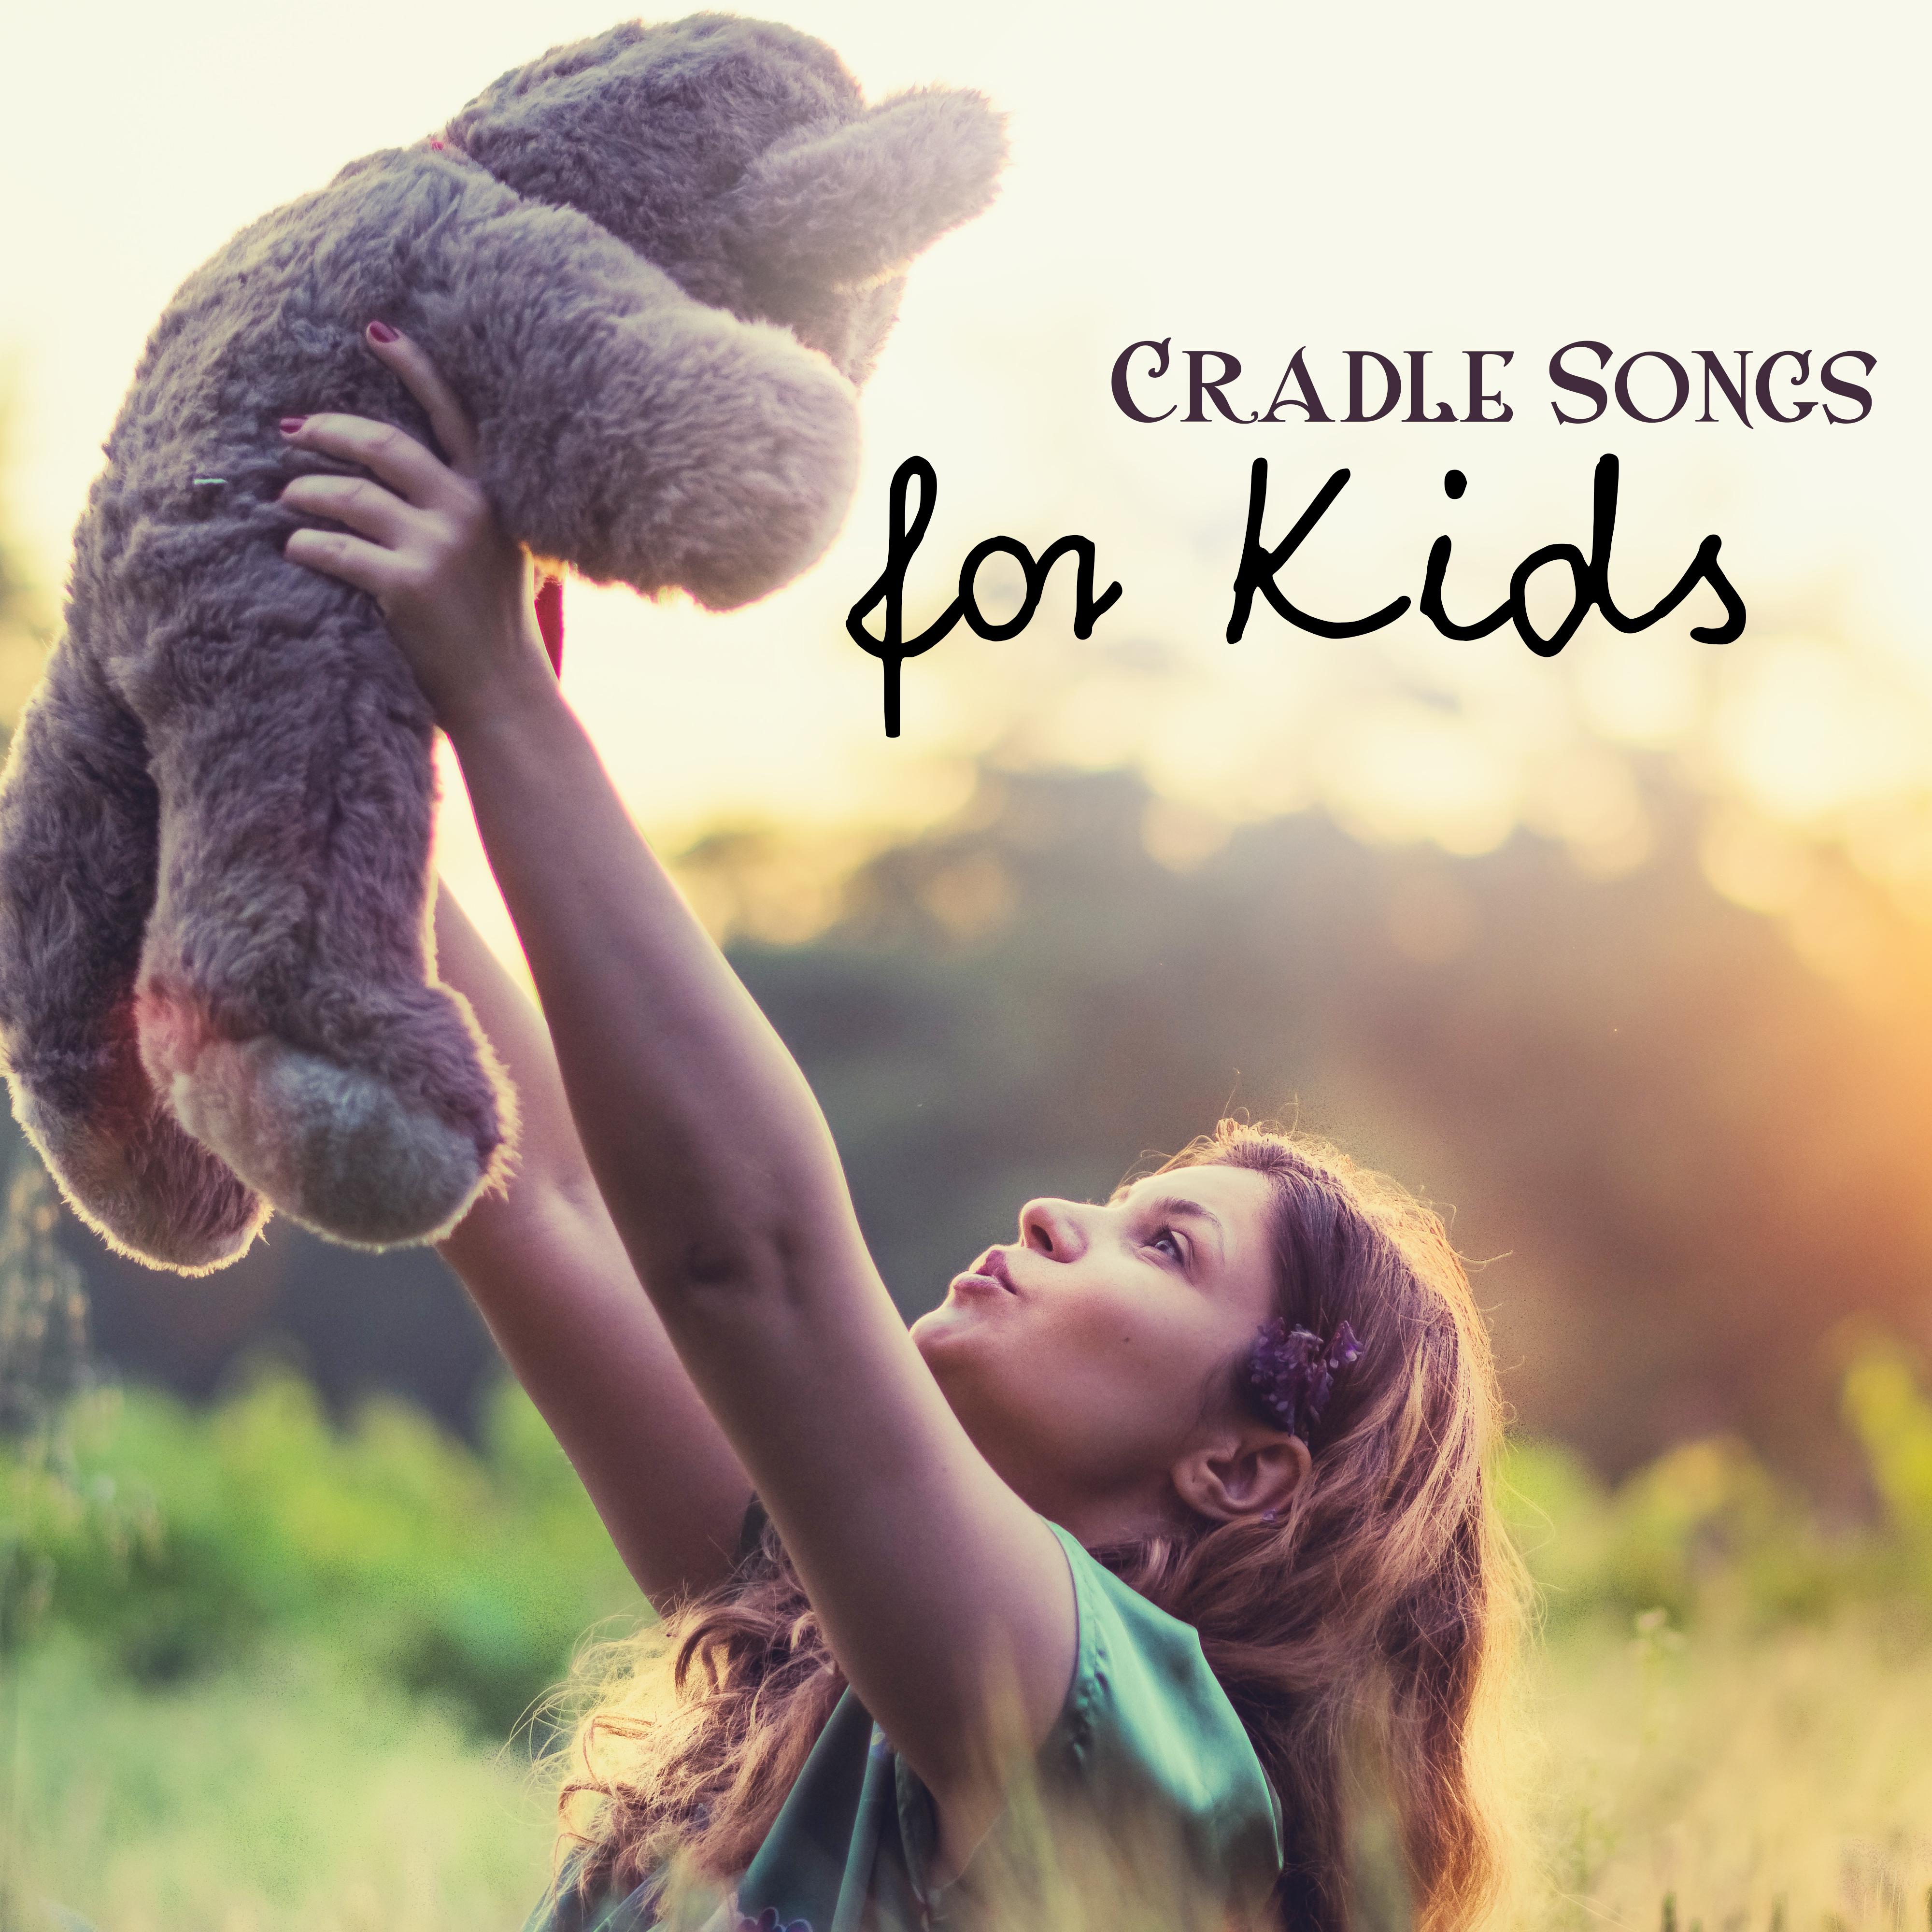 Cradle Songs for Kids  Bedtime, Soft Lullabies, Soothing Melodies for Sleep, Baby Music, Evening Lullaby